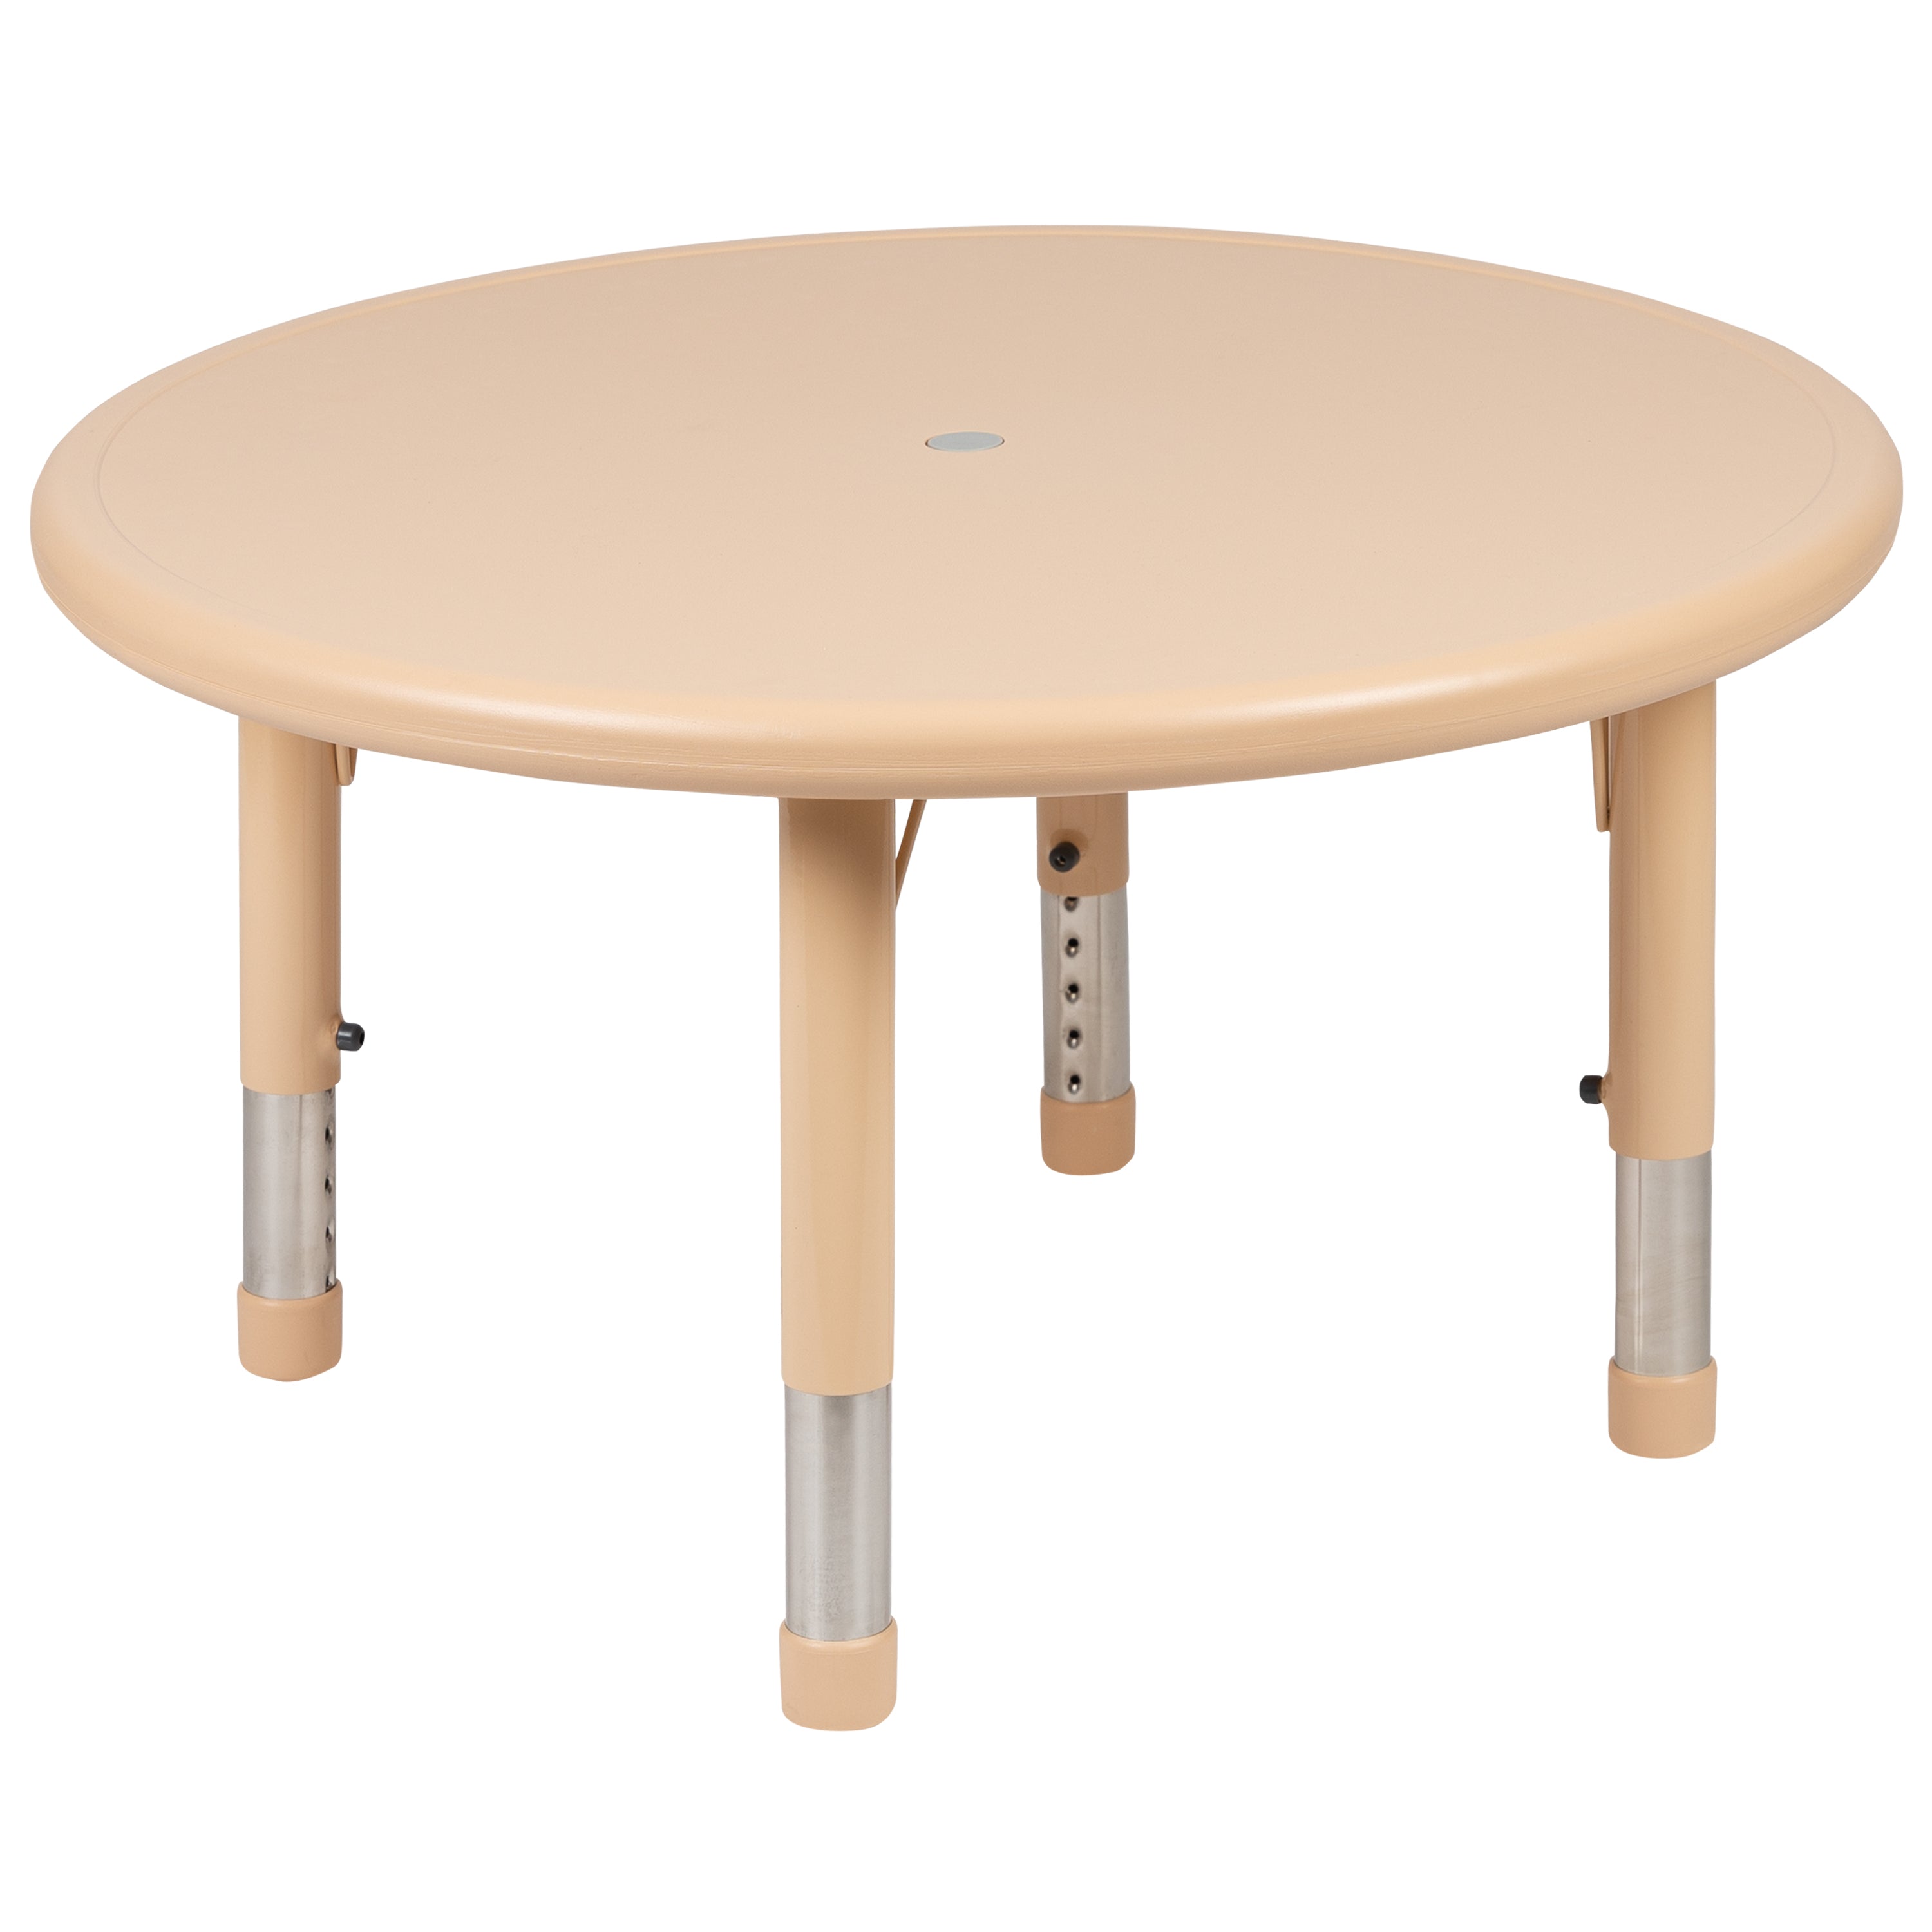 33" Round Plastic Height Adjustable Activity Table Set with 2 Chairs-Round Activity Table Set-Flash Furniture-Wall2Wall Furnishings